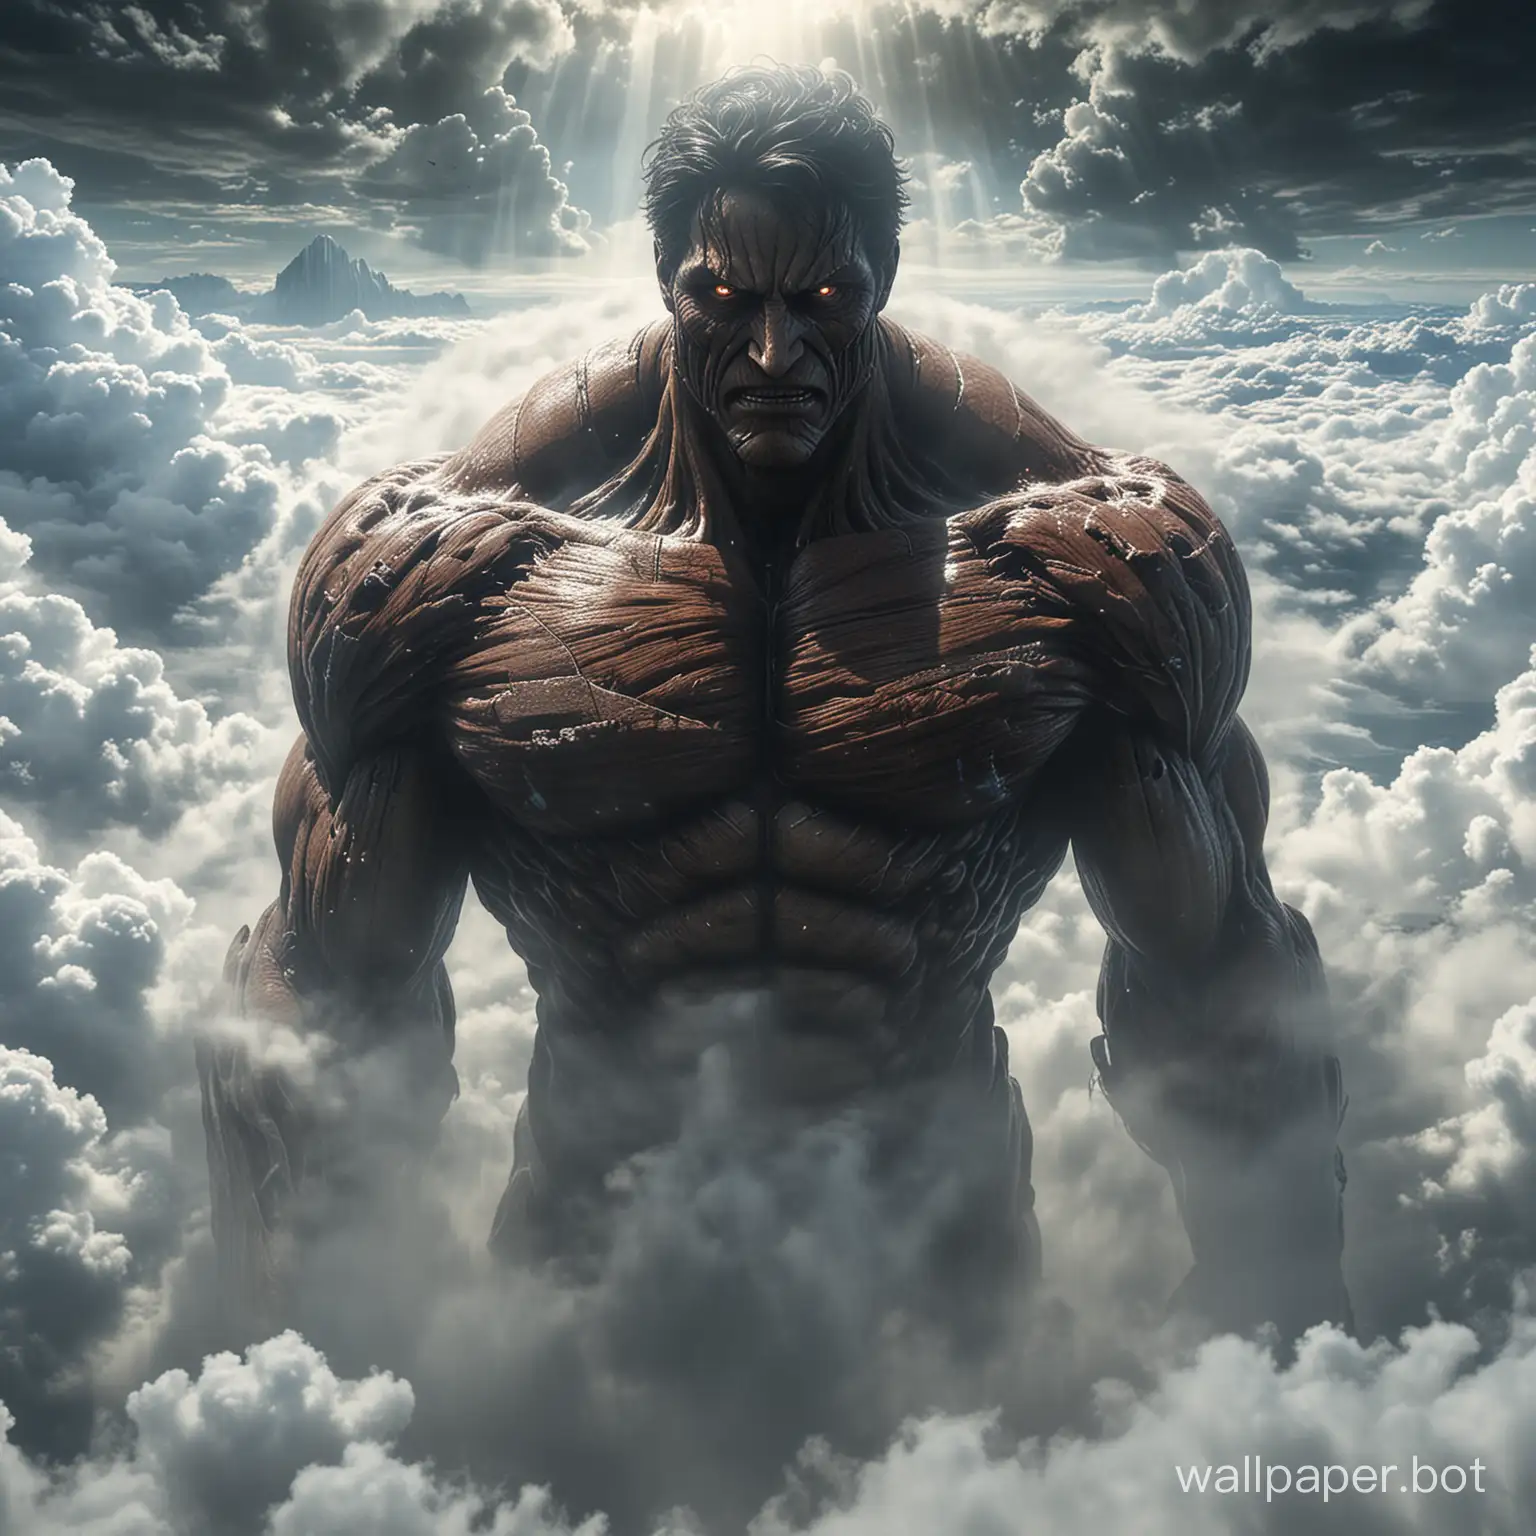 Imagine a colossal figure, like the Titans from "Attack on Titan," emerging from above the clouds. Its upper body—towering and powerful—breaks through the misty veil, revealing only its head, shoulders, and the hint of its torso. The giant's eyes hold an enigmatic gaze as it seems to peer out into the vastness of the sky. Surrounded by the churning sea of clouds, the scene conveys both grandeur and an air of mystery.